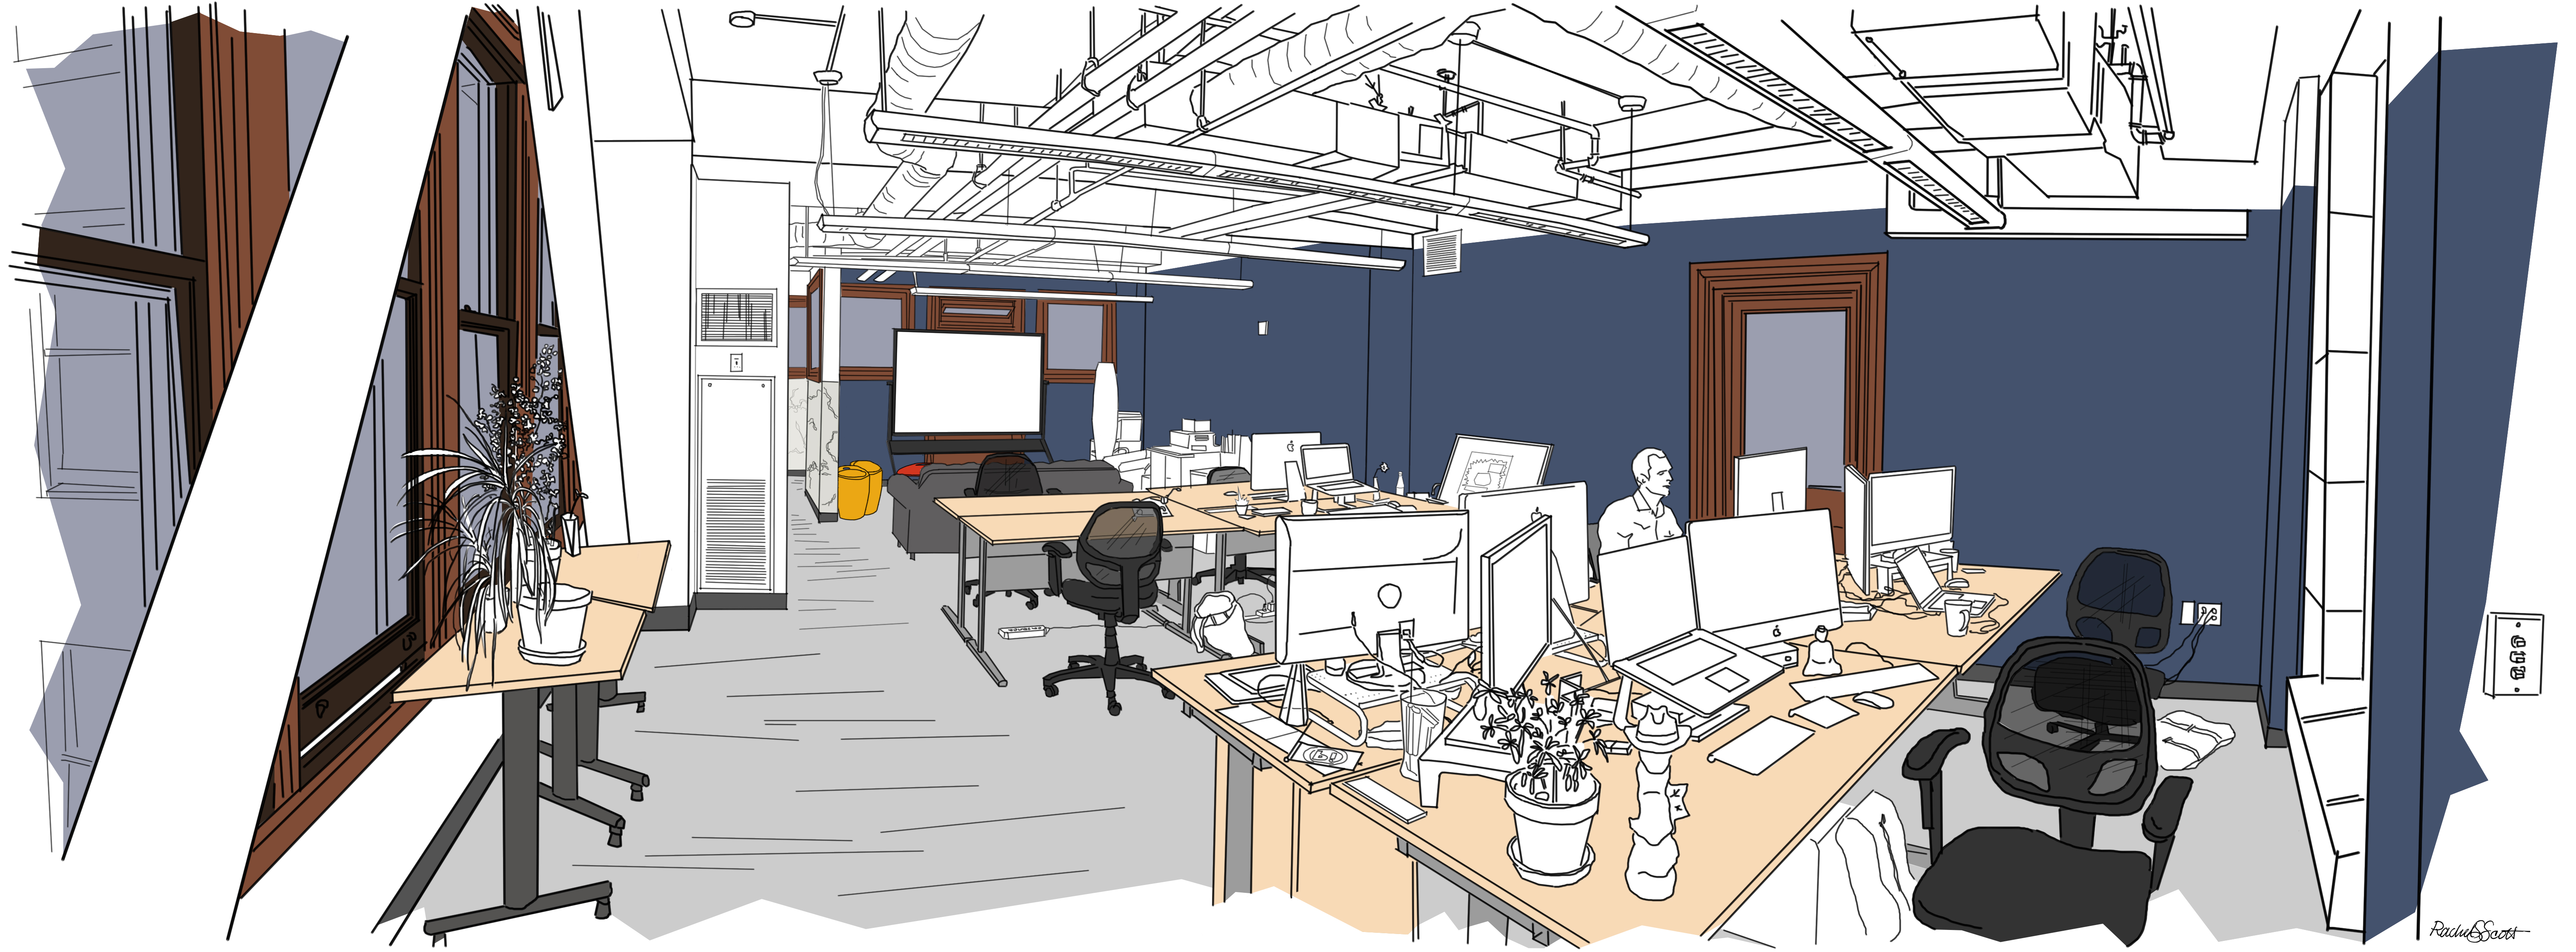 Portent Inc. Creative Services Room: Quick Fixes for Workspaces - Low Impact Solution Sketch